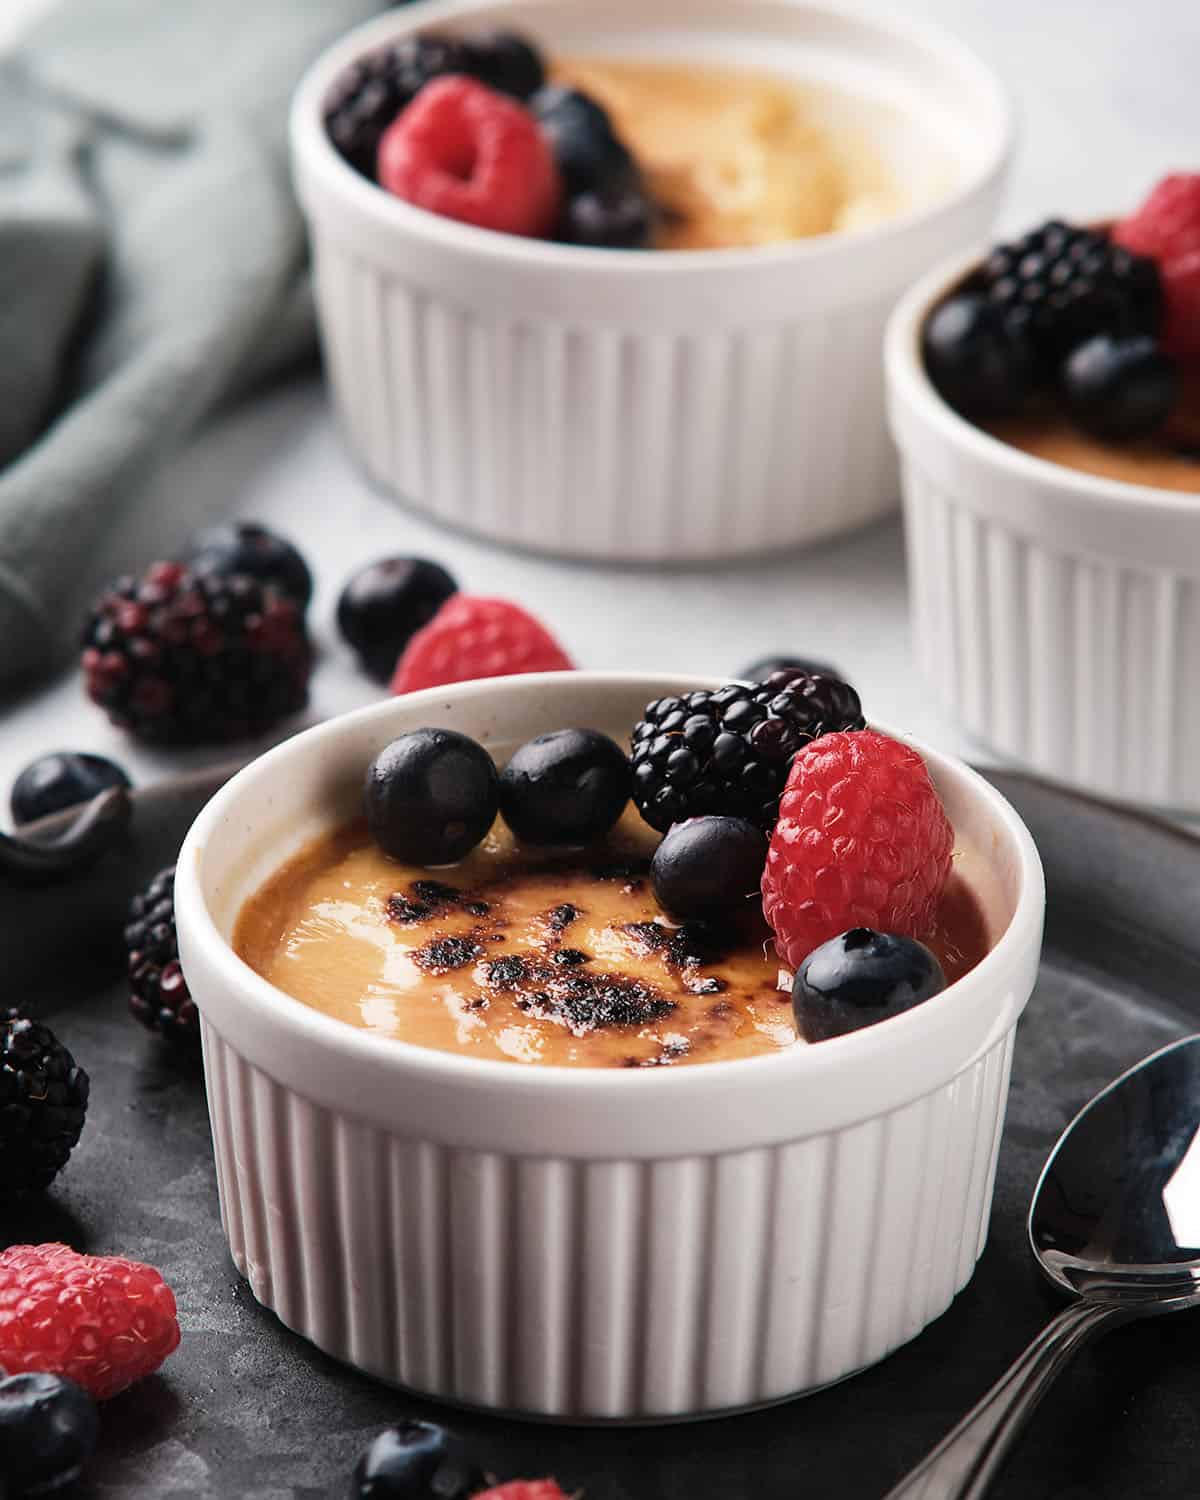 keto creme brulee topped with berries.